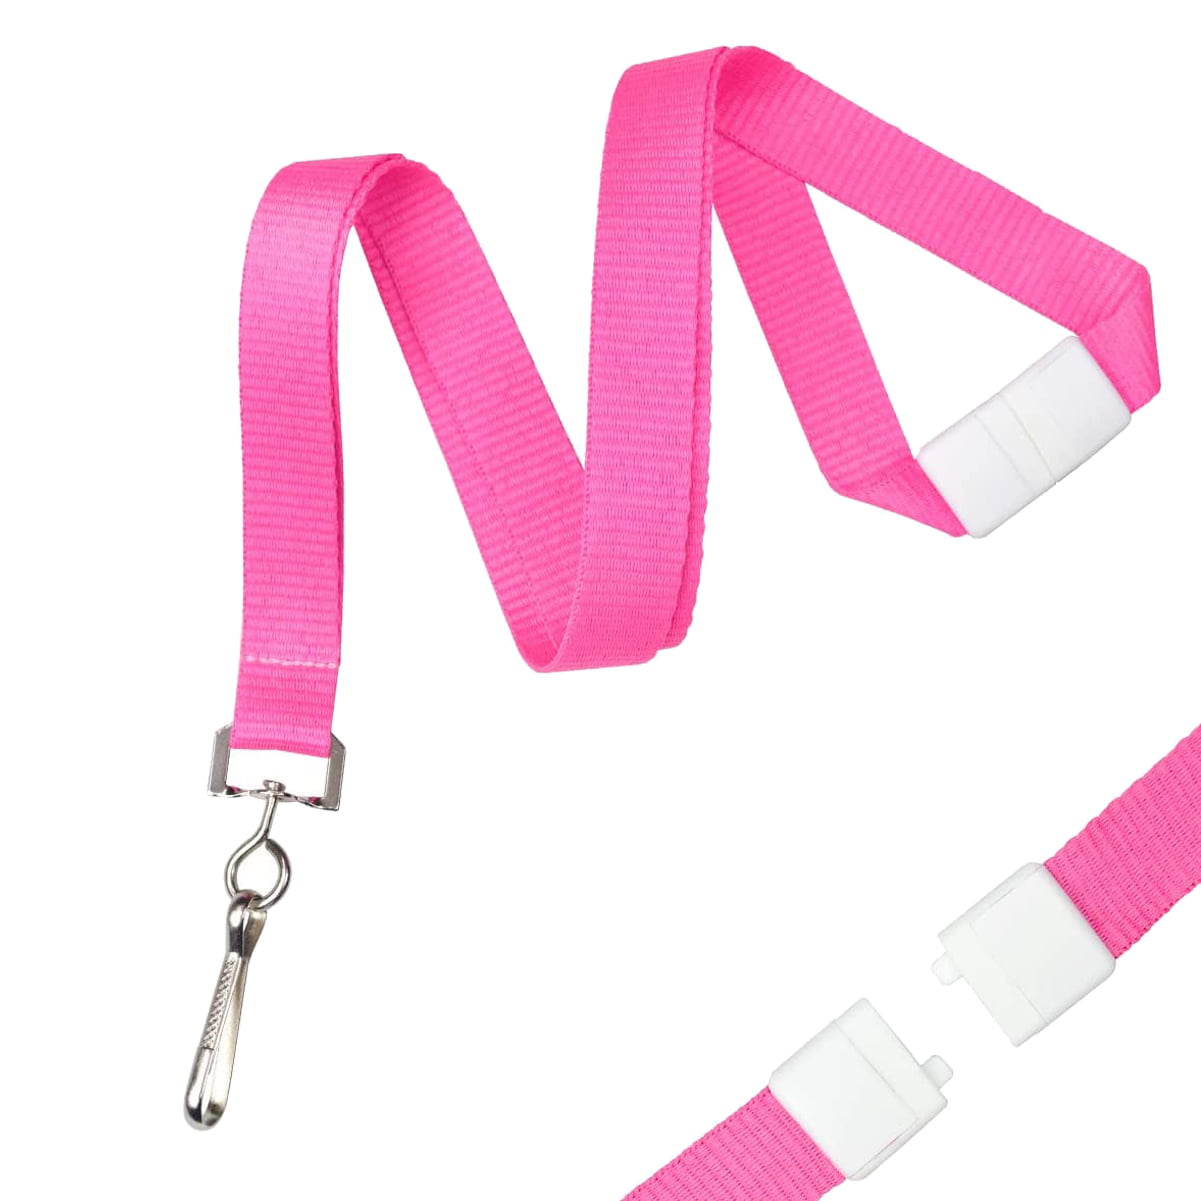 Mixed 100 Pack Lanyard Safety Breakaway Neck Strap For ID Card Pass Badge Holder 